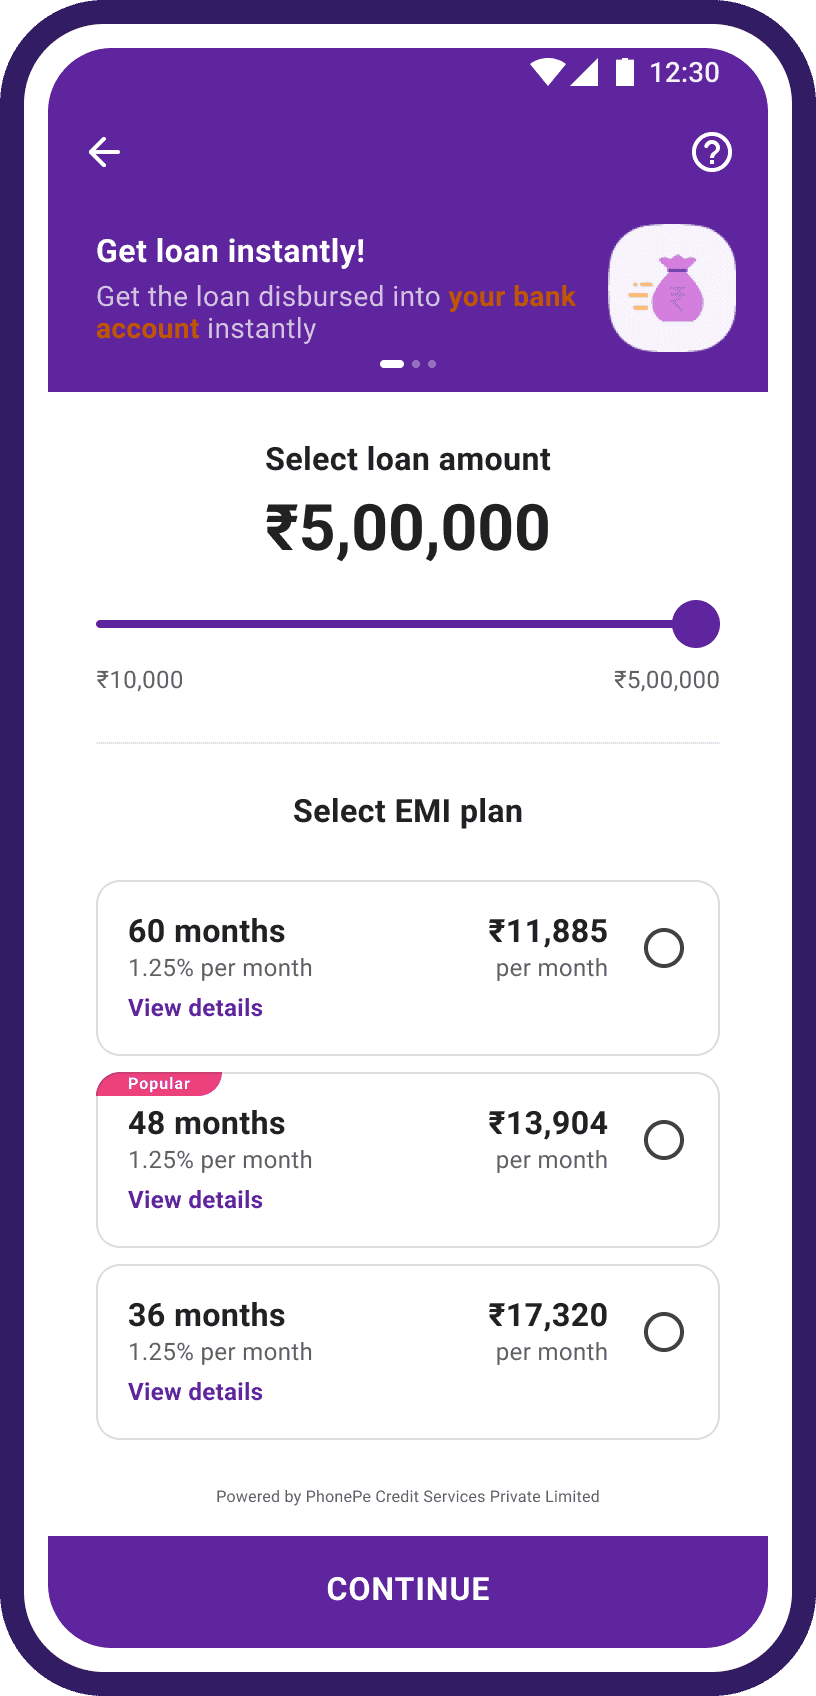 Instant Cash Solution: Get ₹5 Lakh from PhonePe in Just 10 Minutes - No Bank Visit Needed!